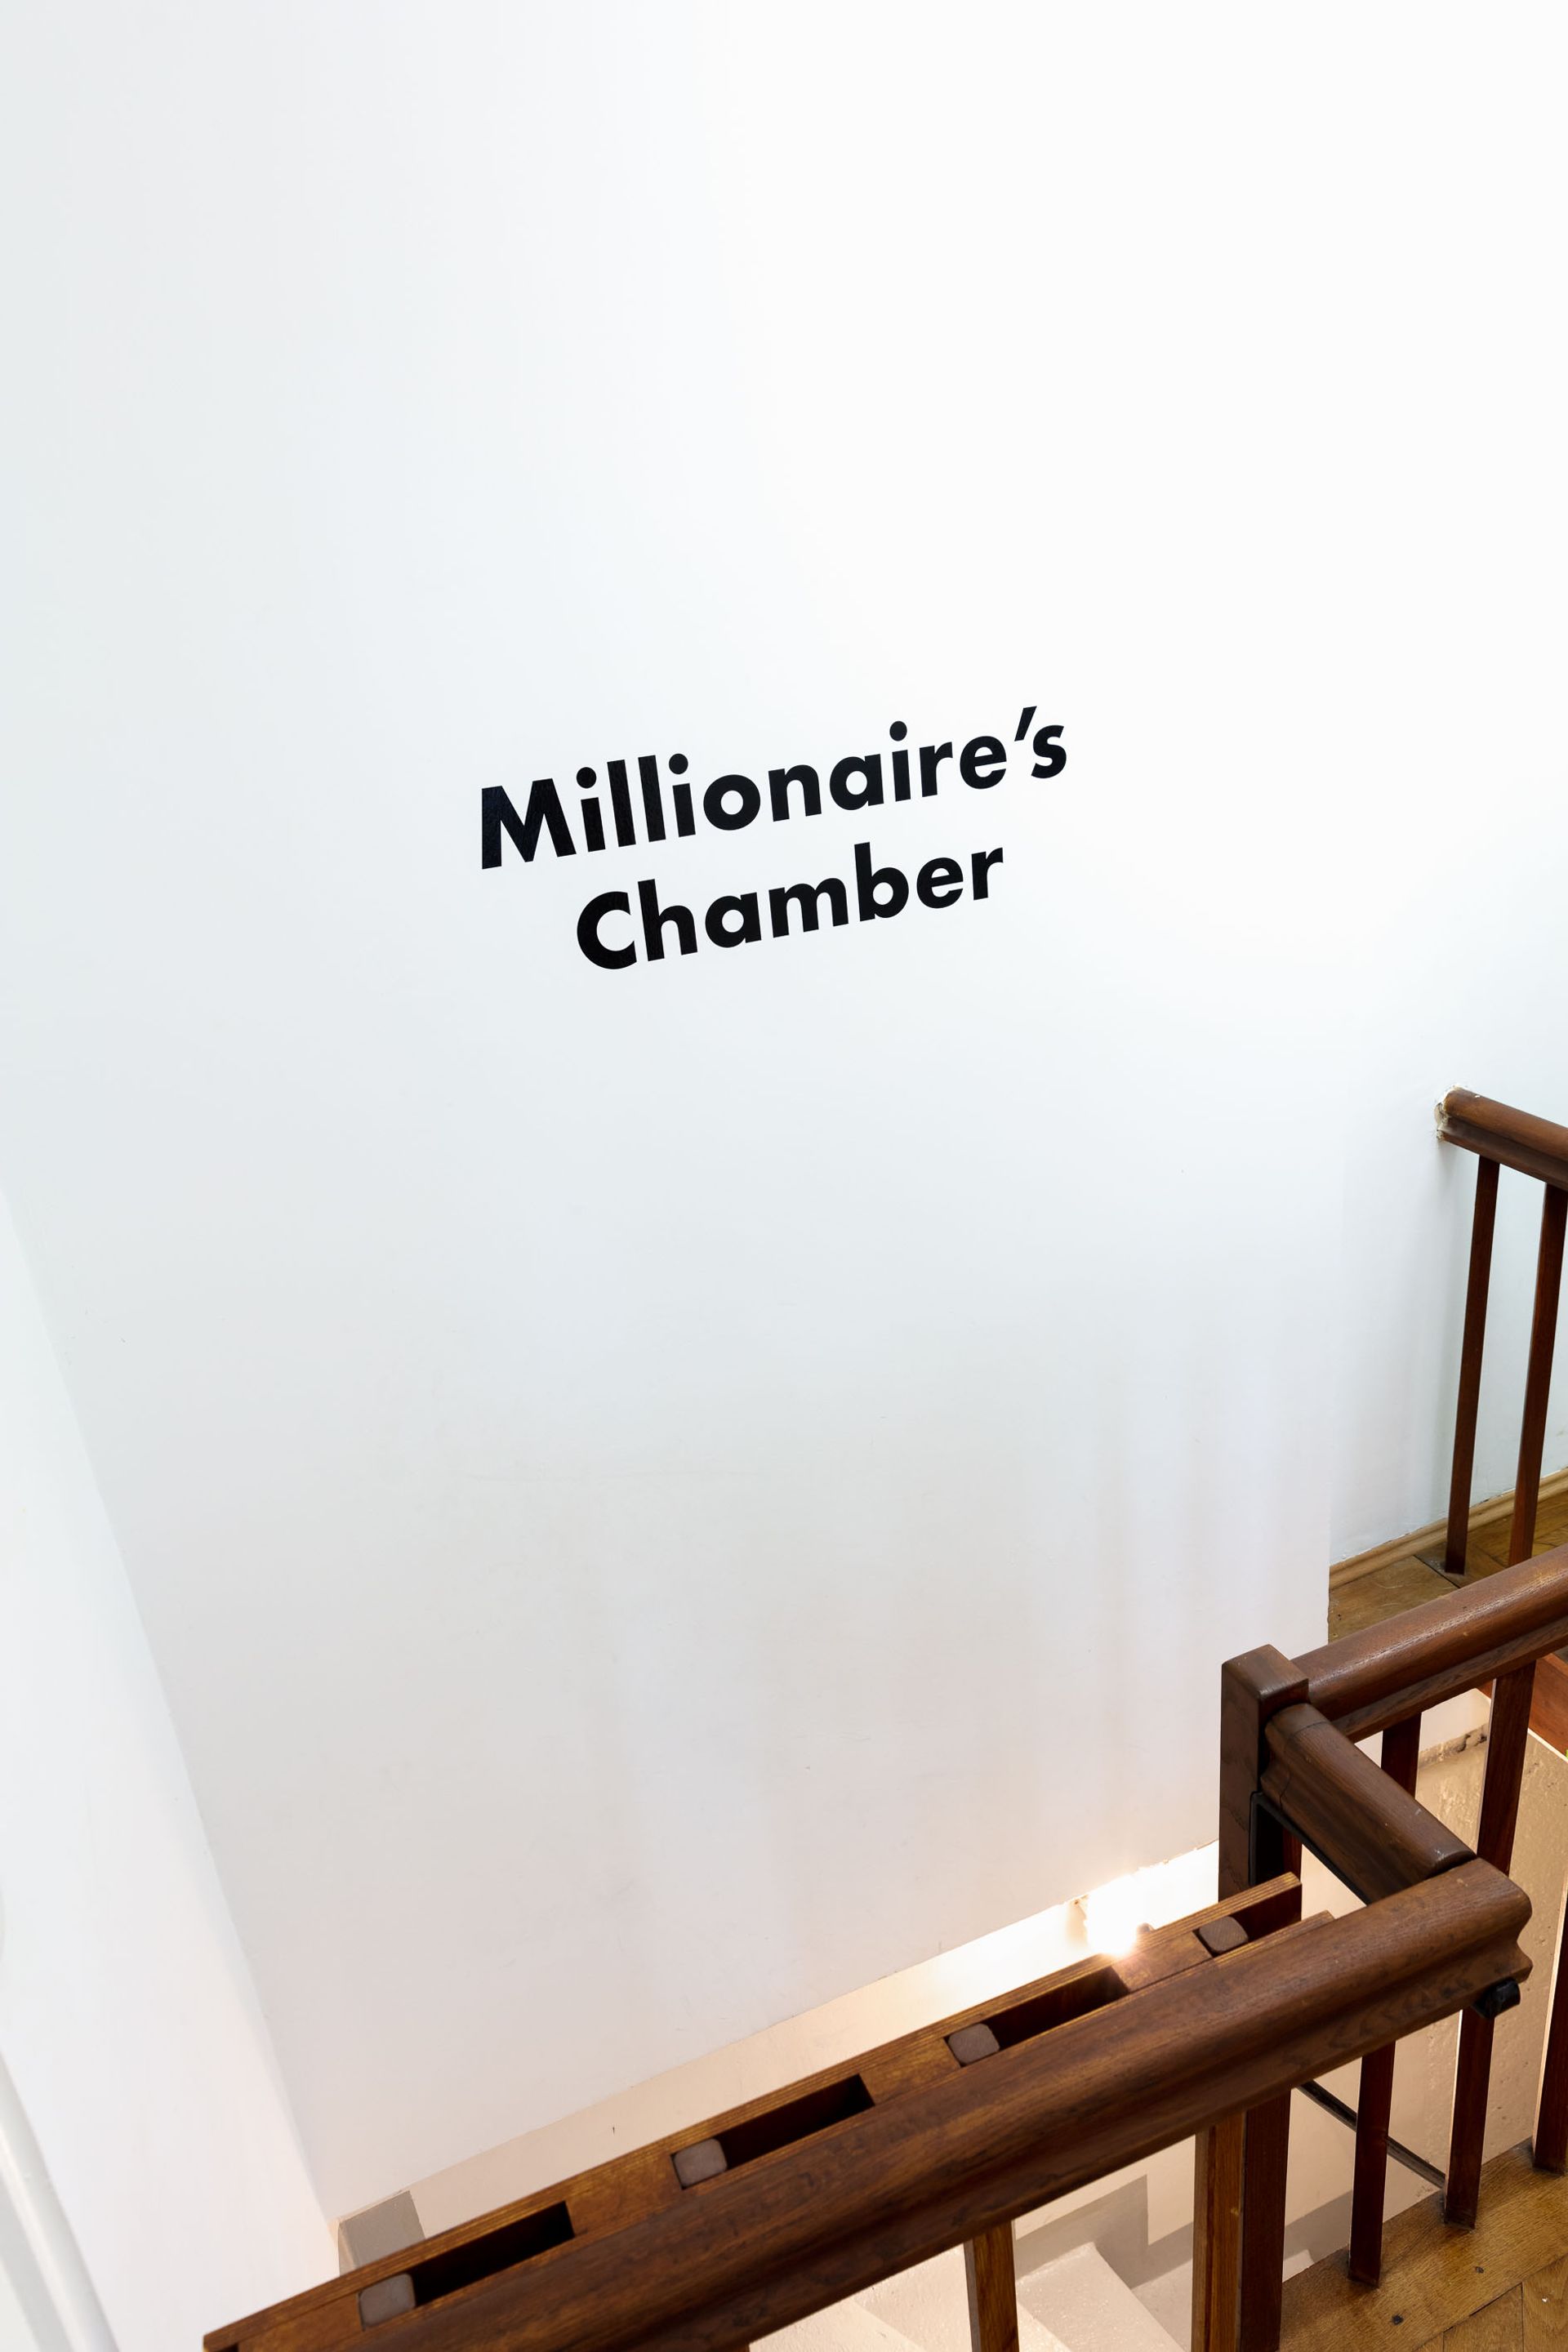 Exhibition view: “Millionaire’s Chamber”  A 1-year project by Thomas Geiger, photo: Sebastian Kissel